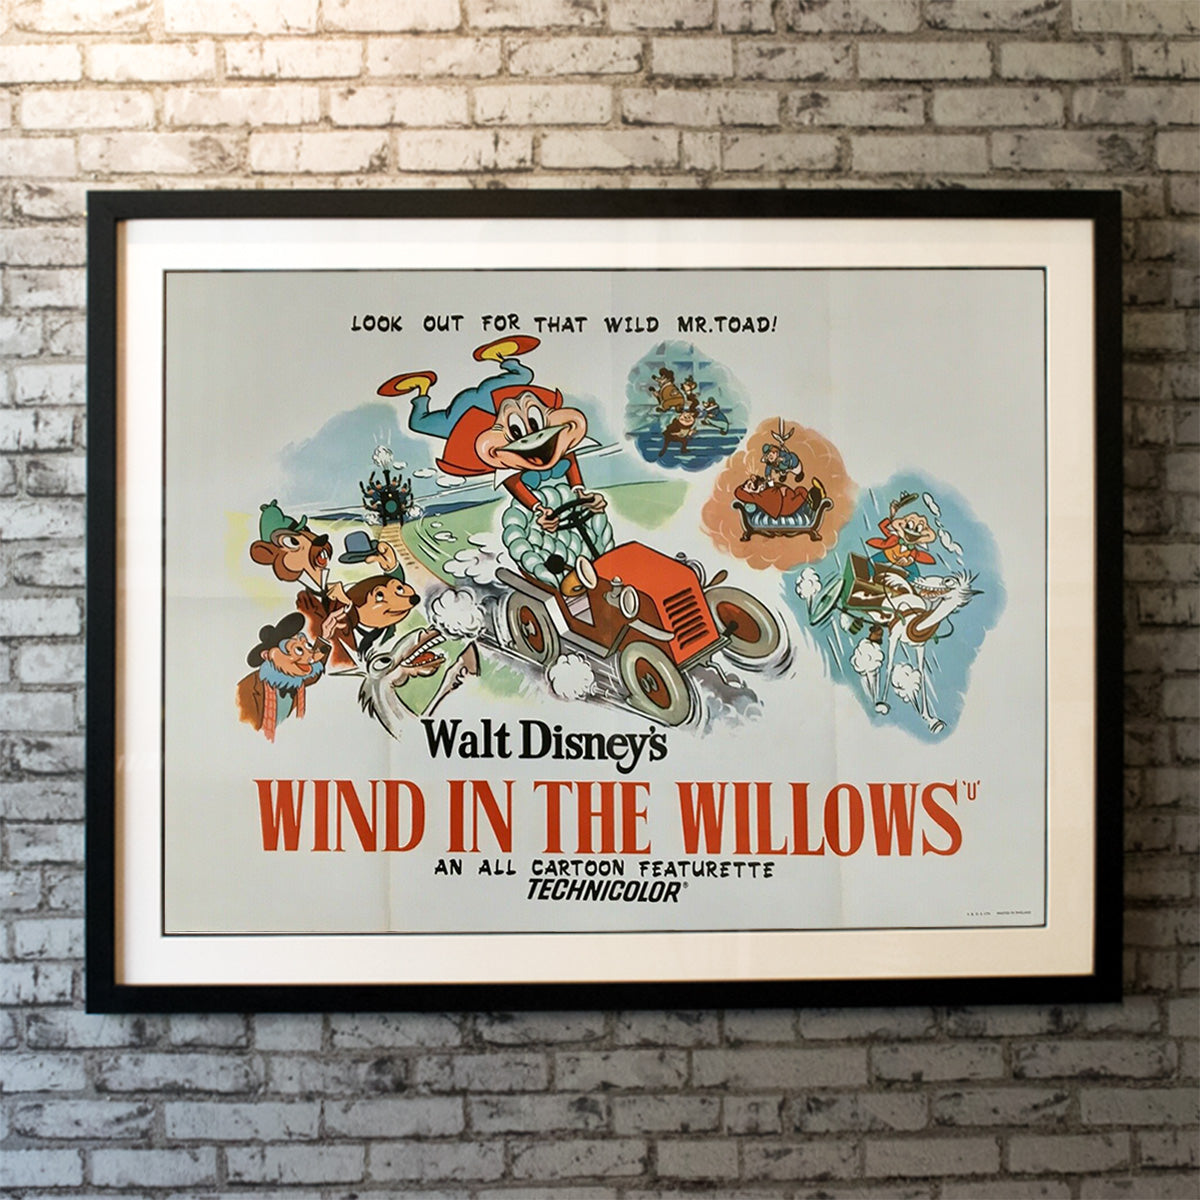 Wind In The Willows (1987R)